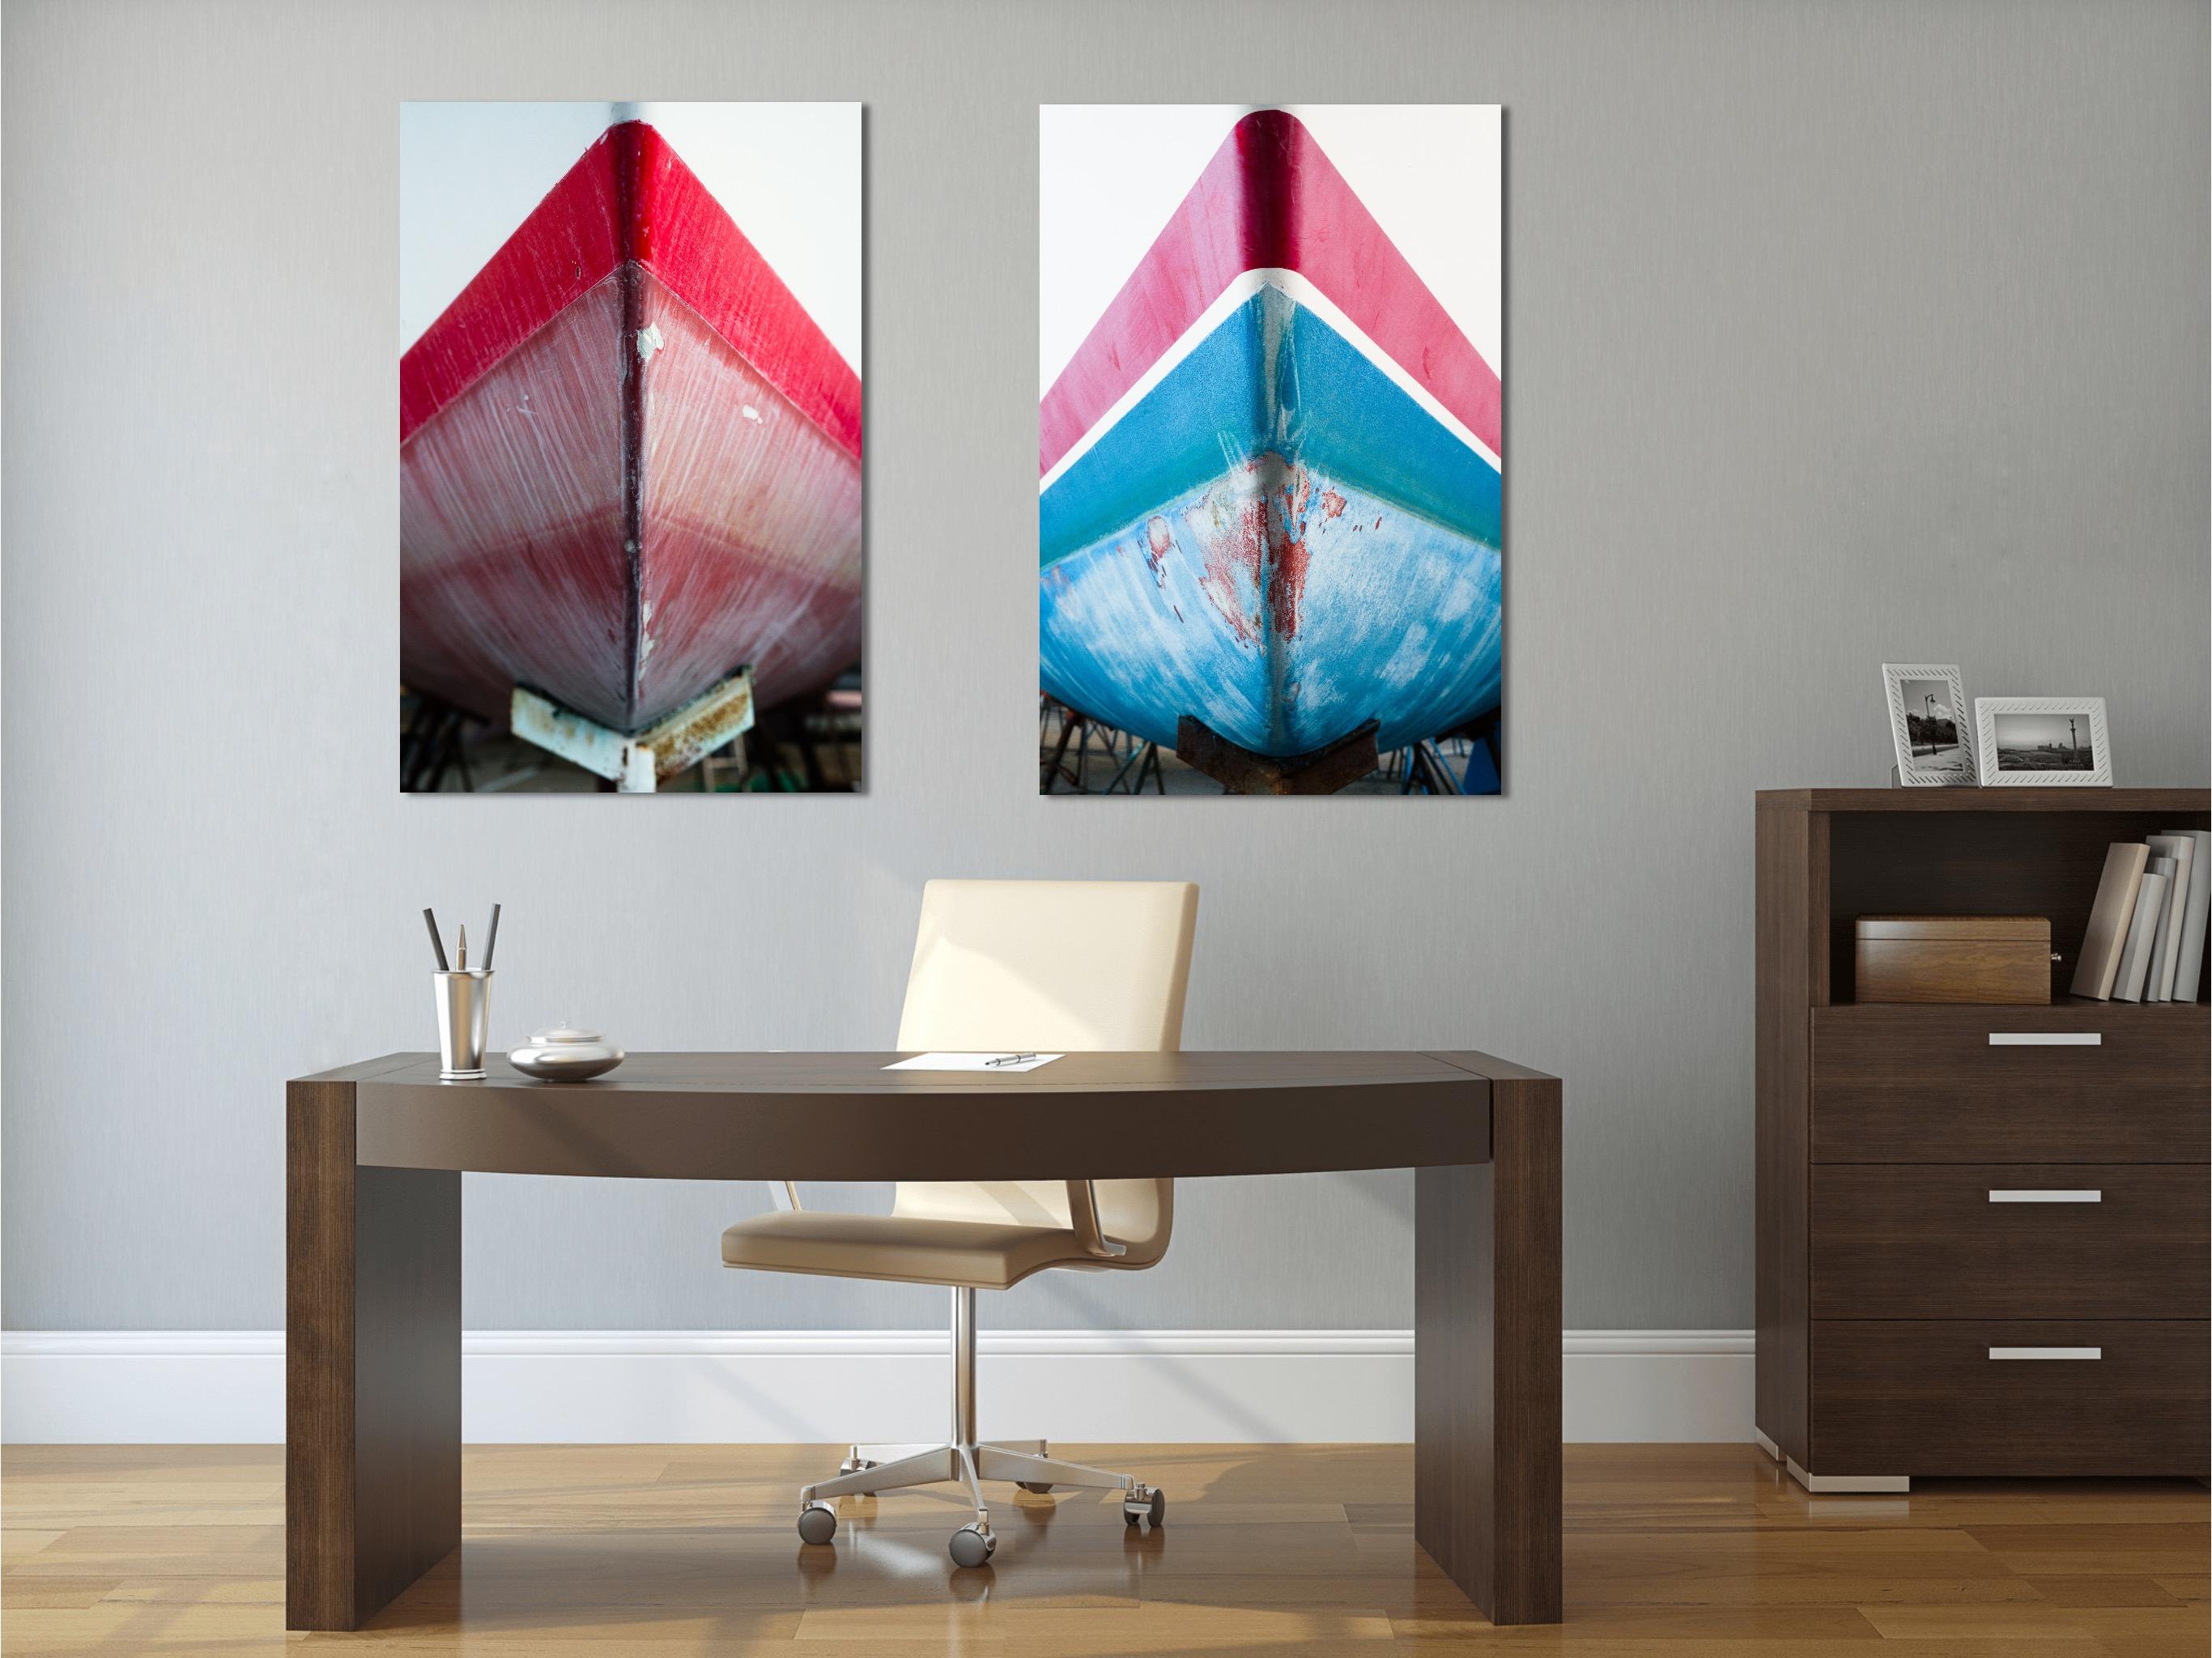 This abstract nautical contemporary photograph by Peter Mendelson pictures a close-up view of a red, white, and blue boat prow. The image is shot from an angle that creates a triangular shape with a the red rim of the boat appearing to point upward.